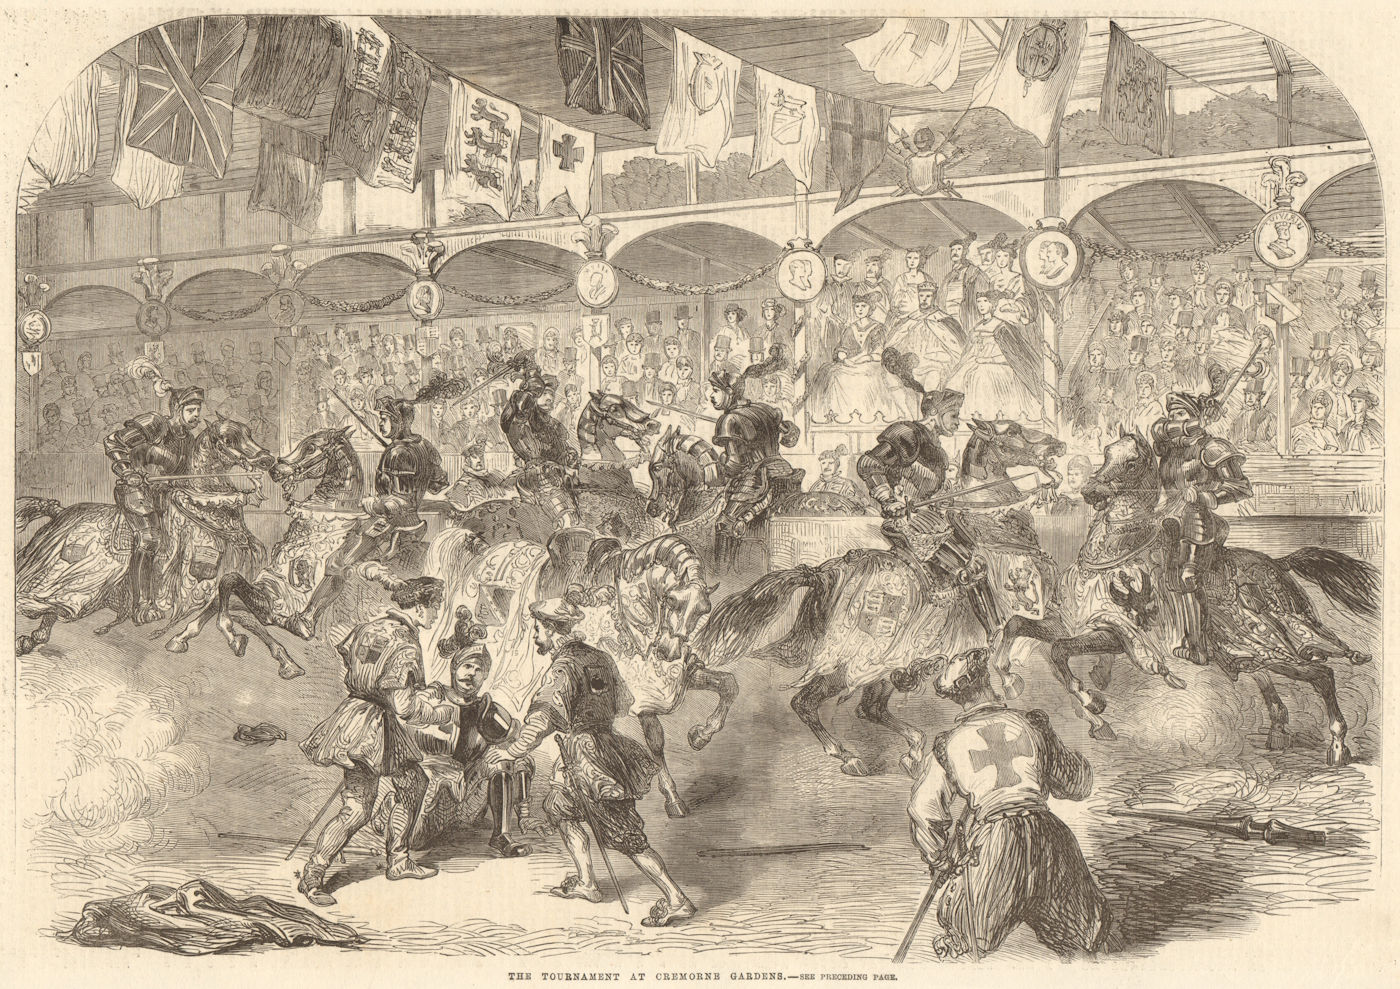 Associate Product The tournament at Cremorne Gardens. London. Militaria 1863 ILN full page print